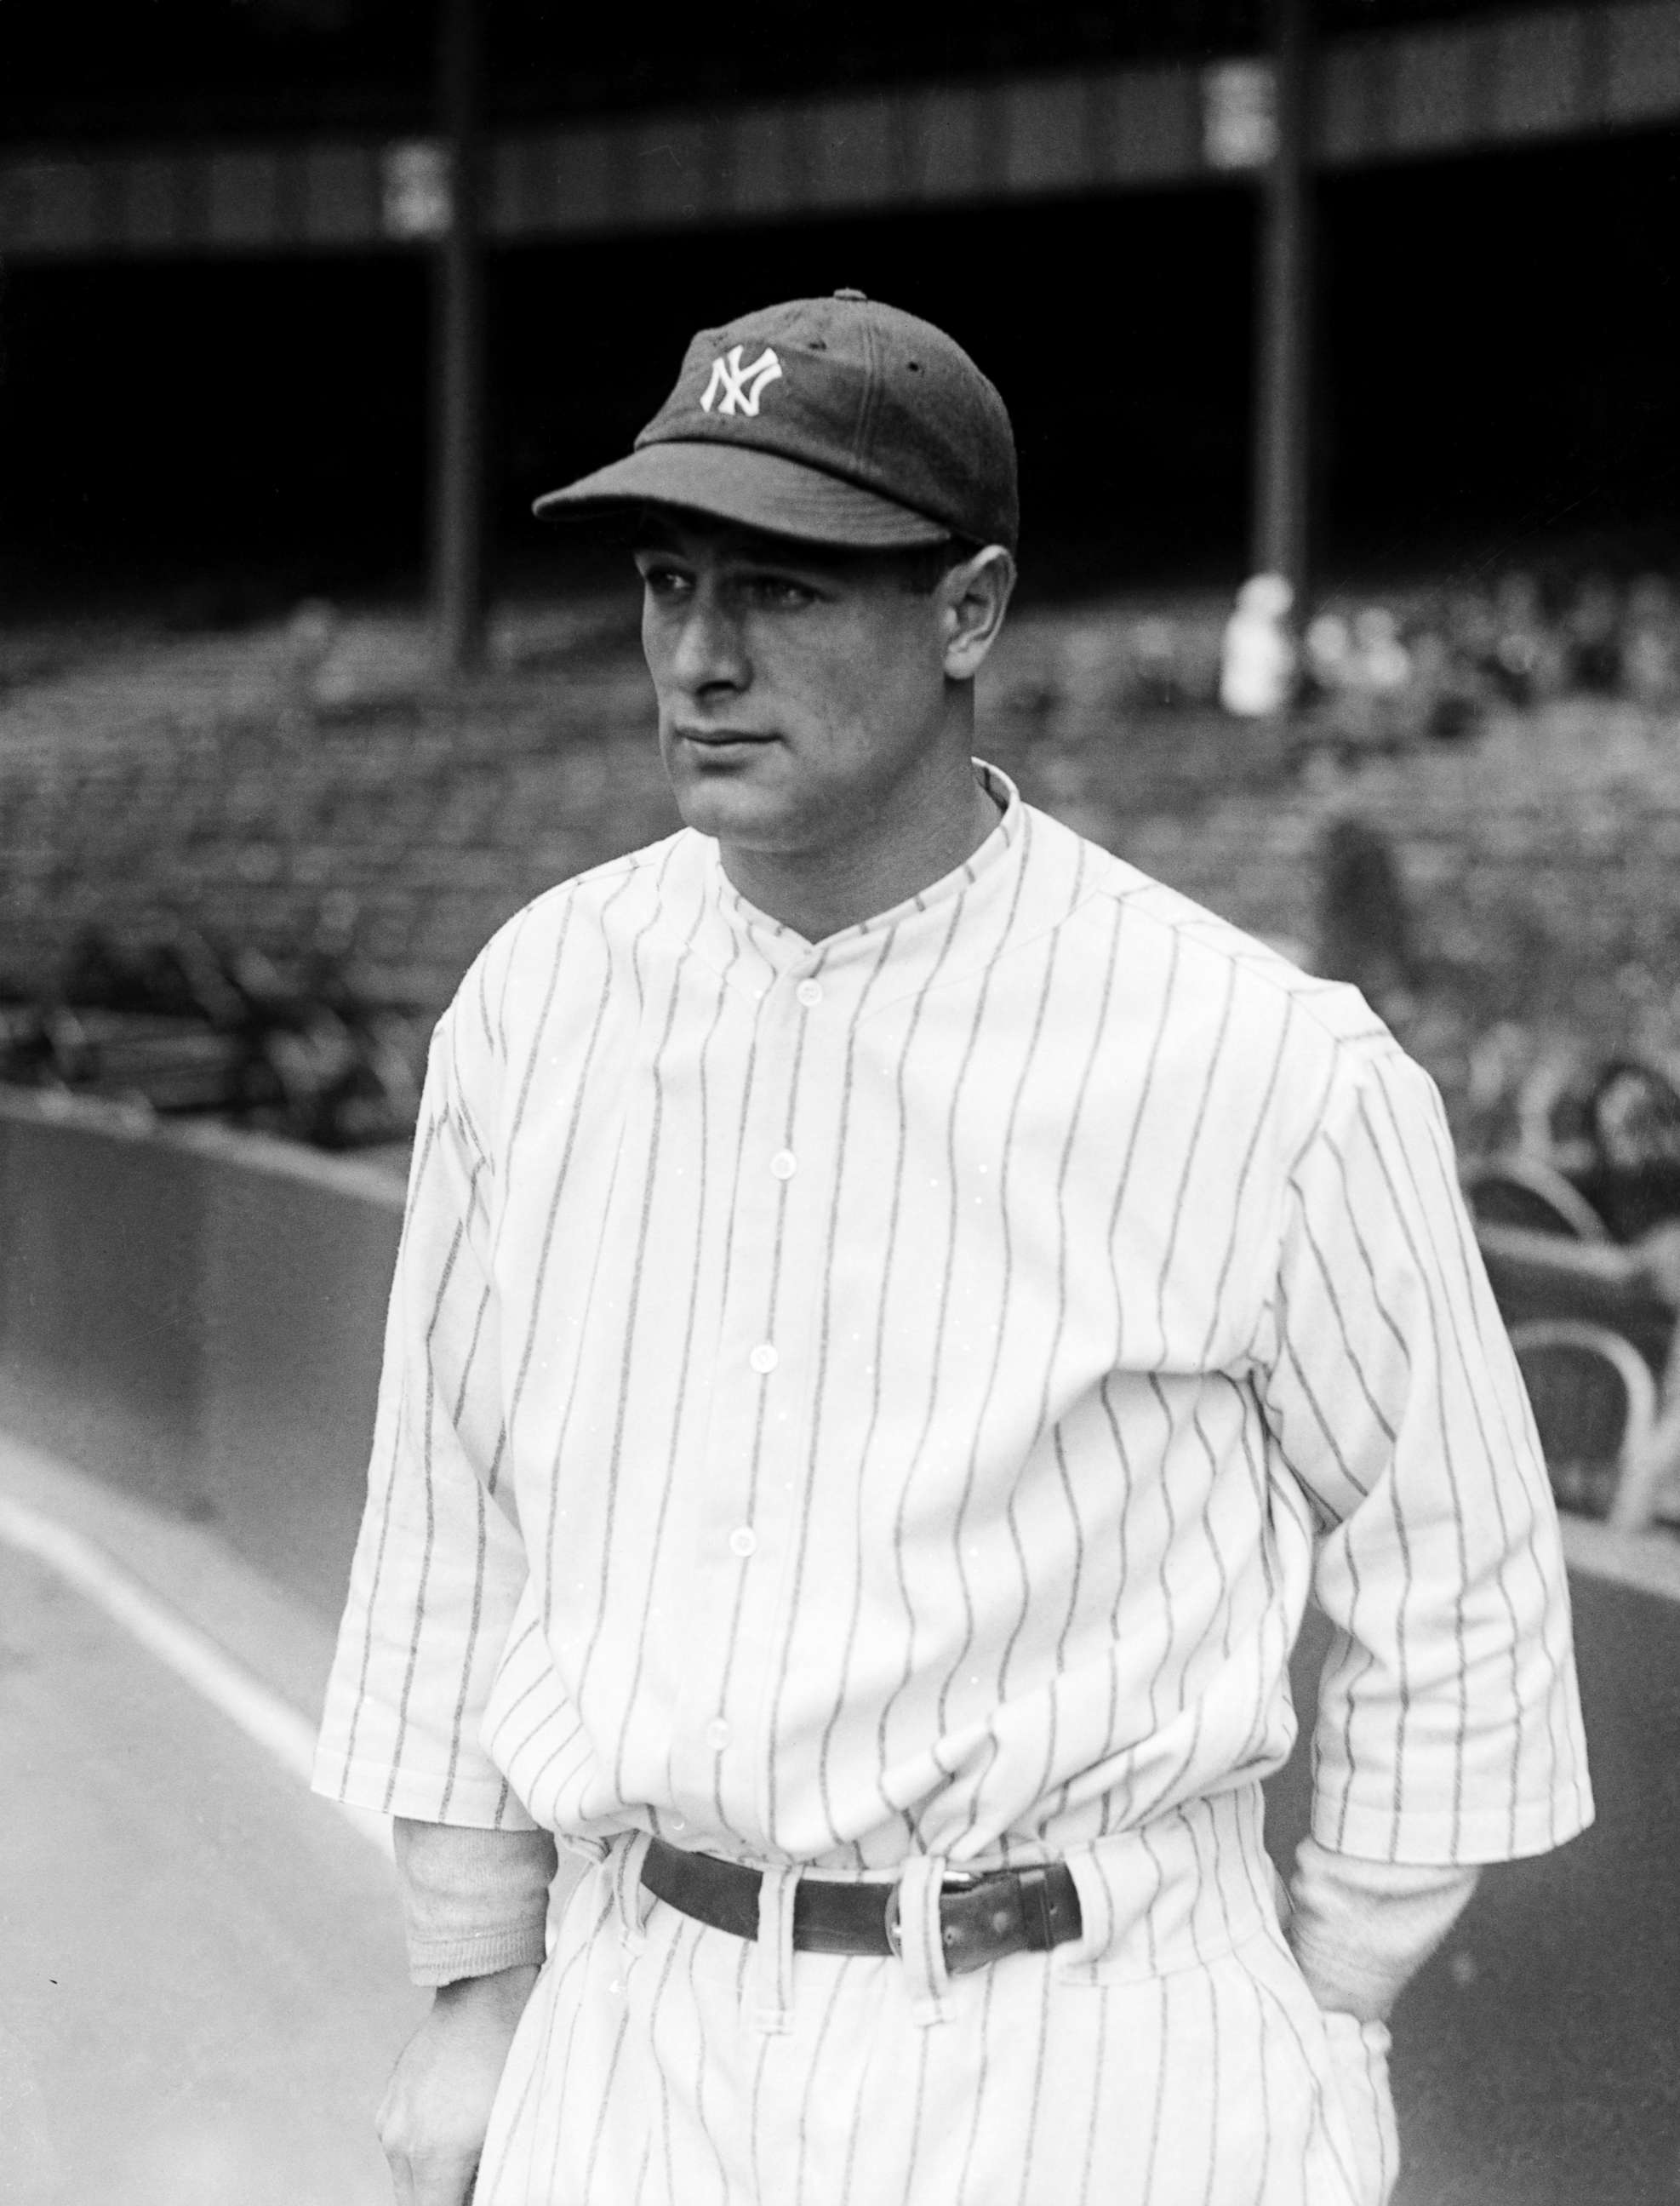 PHOTO: Lou Gehrig of the New York Yankees.